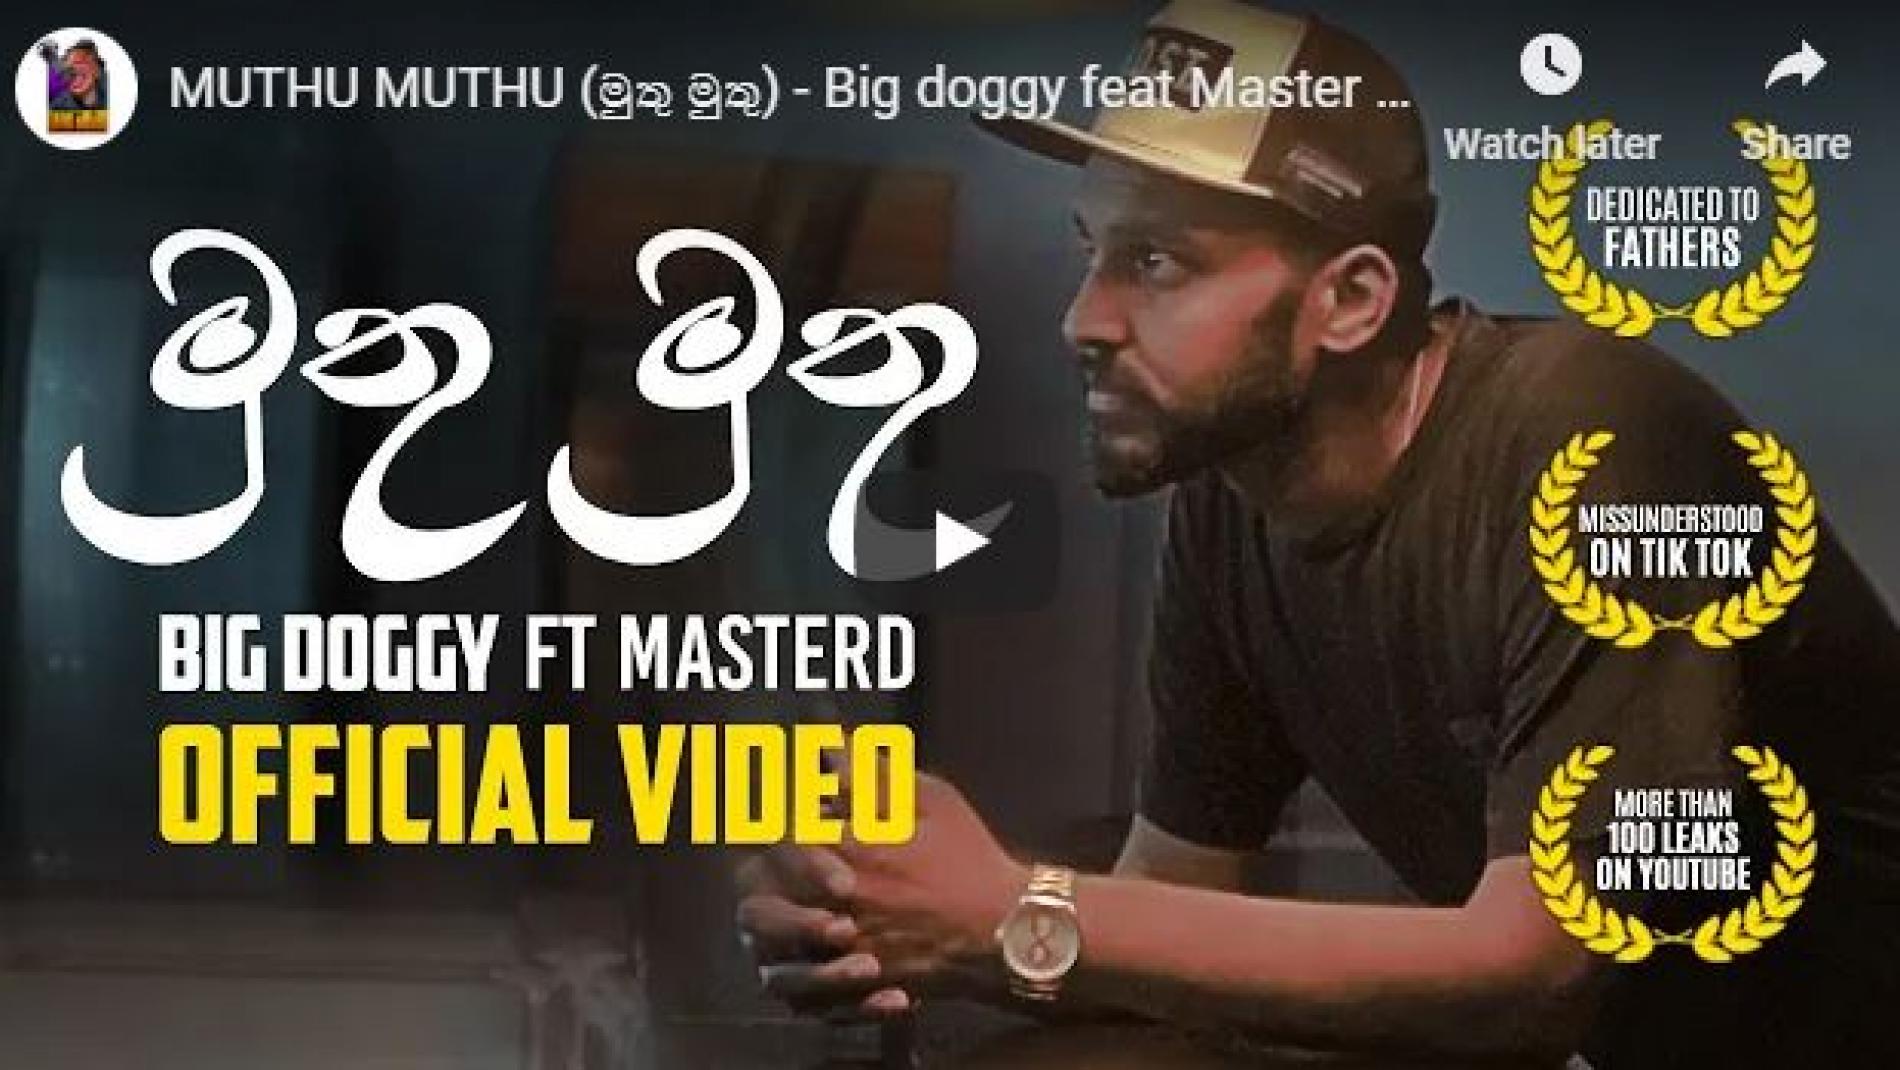 New Music : Muthu Muthu (මුතු මුතු) – Big Doggy feat Master D | Official Music Video